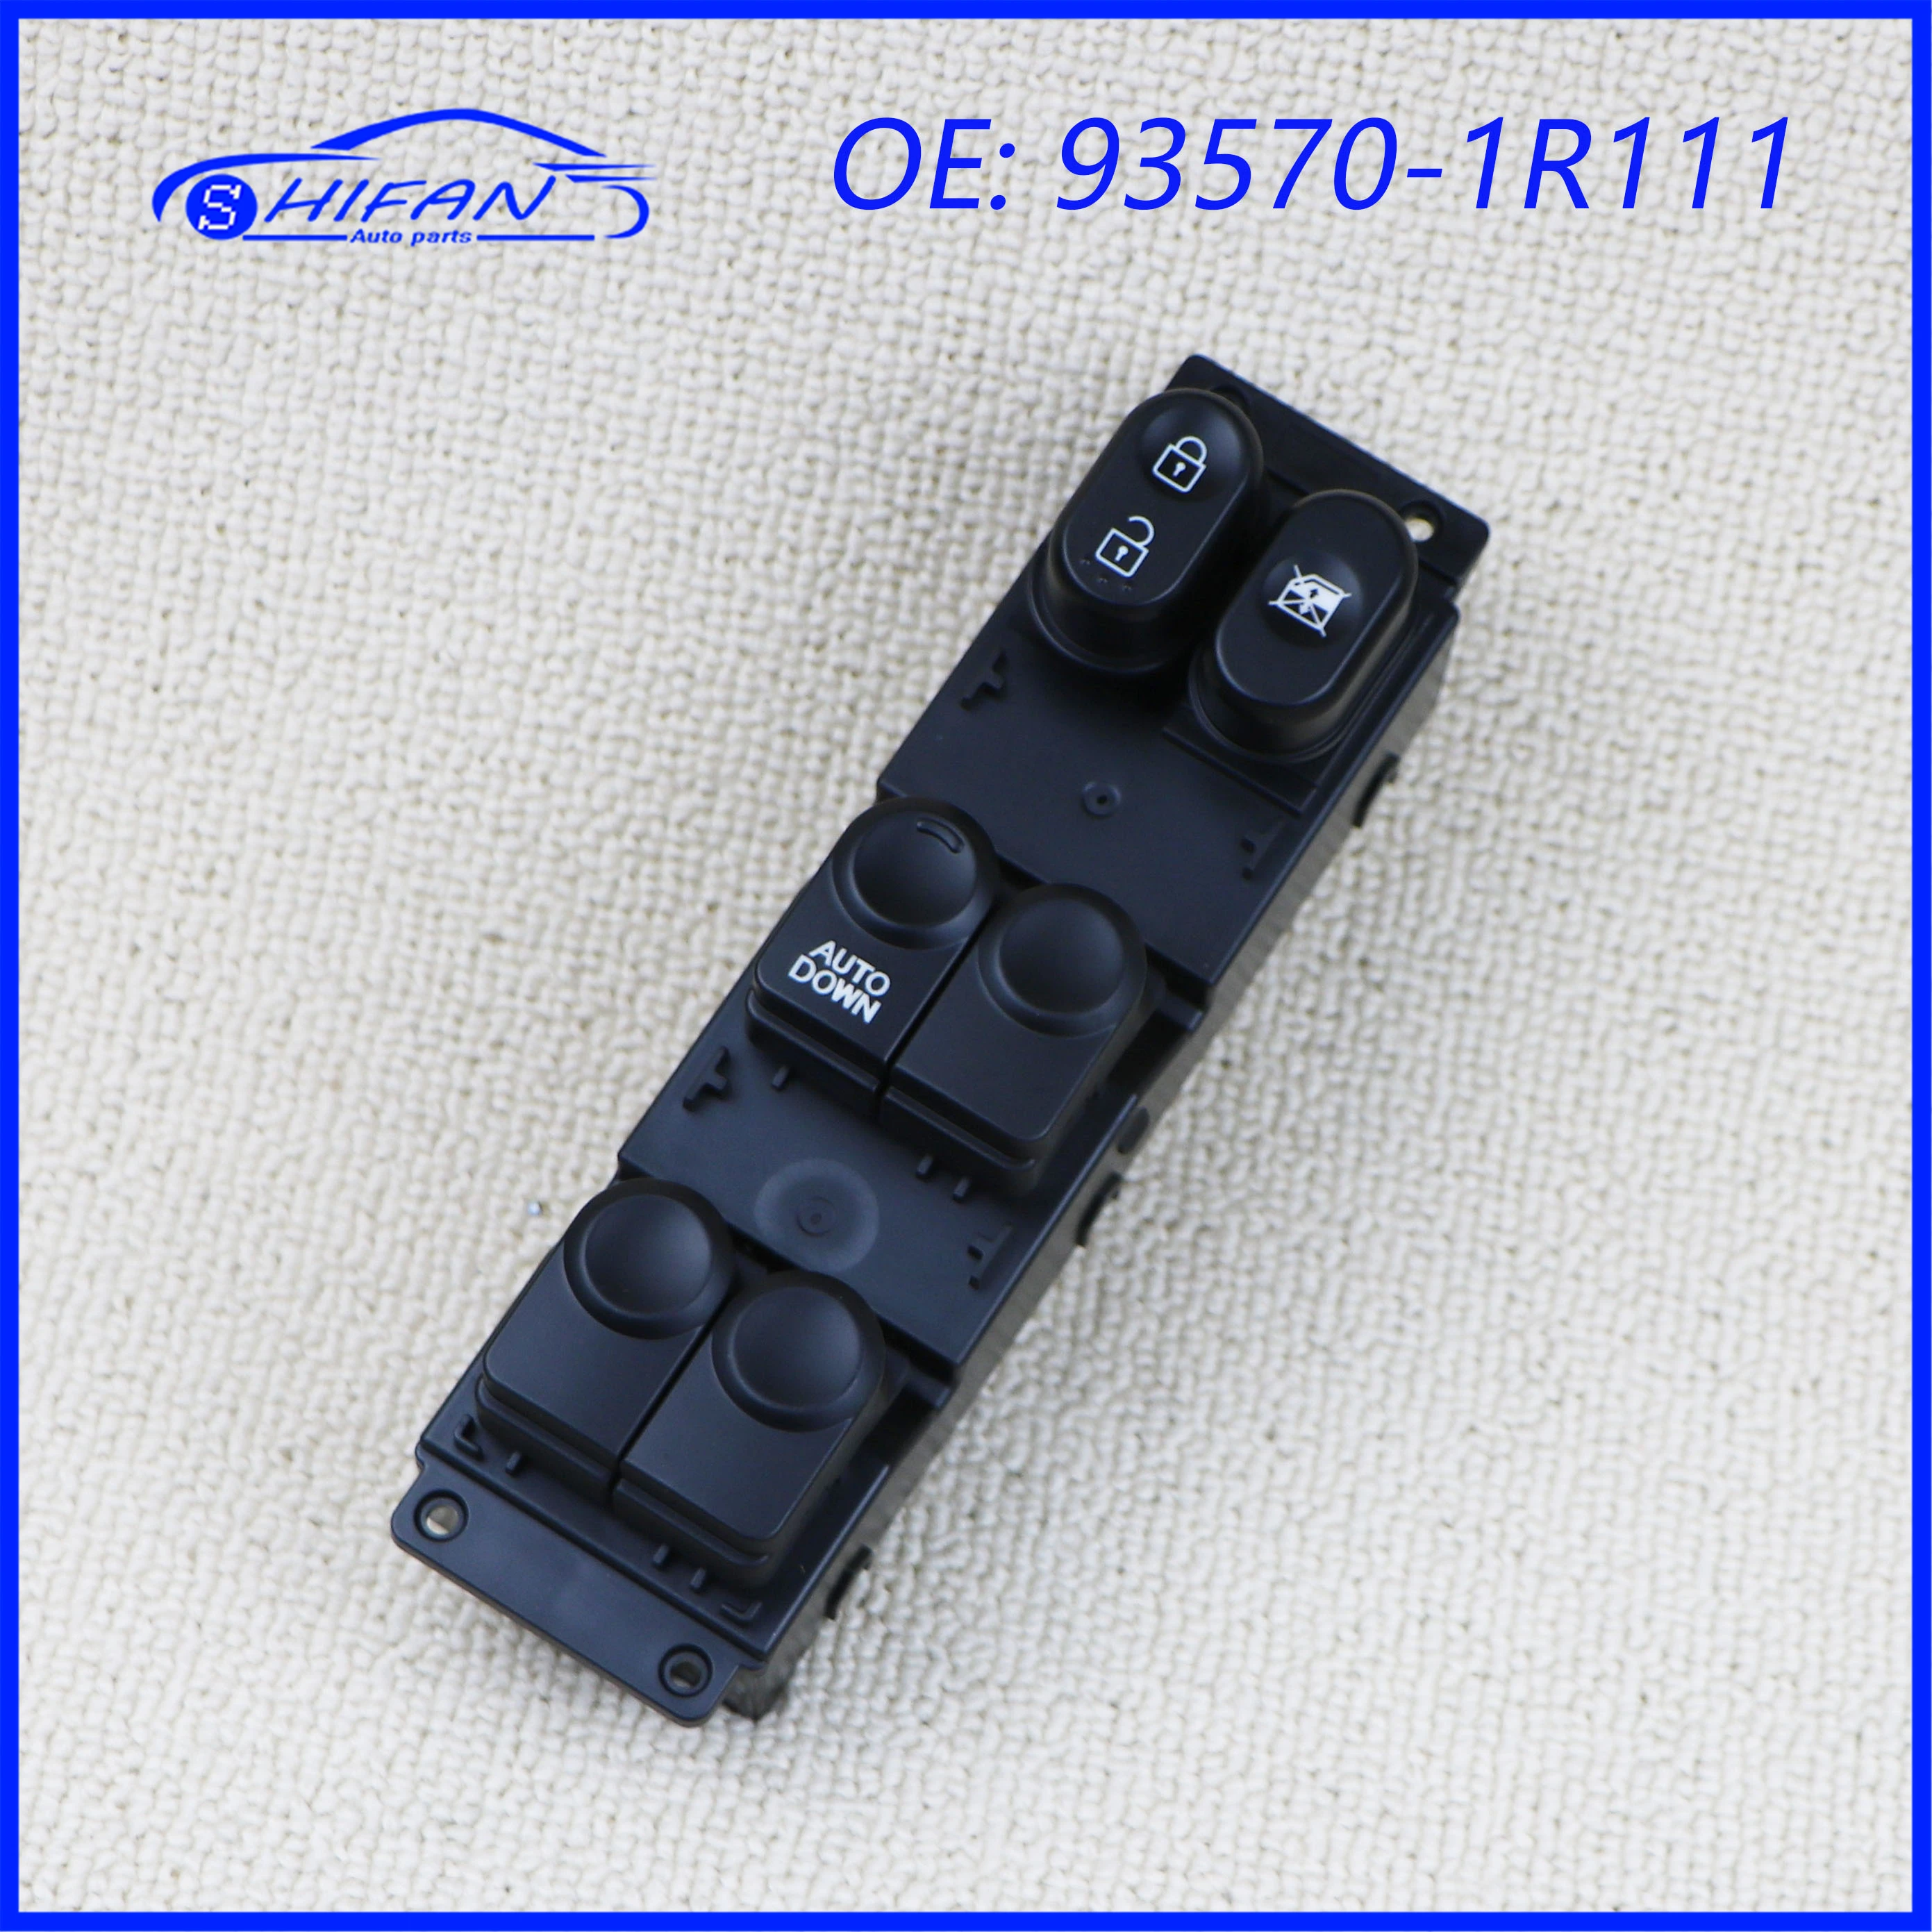 93570-1R111 Car Power Window Control Switch Electric Switch For Hyundai Accent 2010-2017 Car Accessories 935701R111 sktoo for 2012 2014 changan cs35 window control switch glass lifter switch electric car window switch back door switch